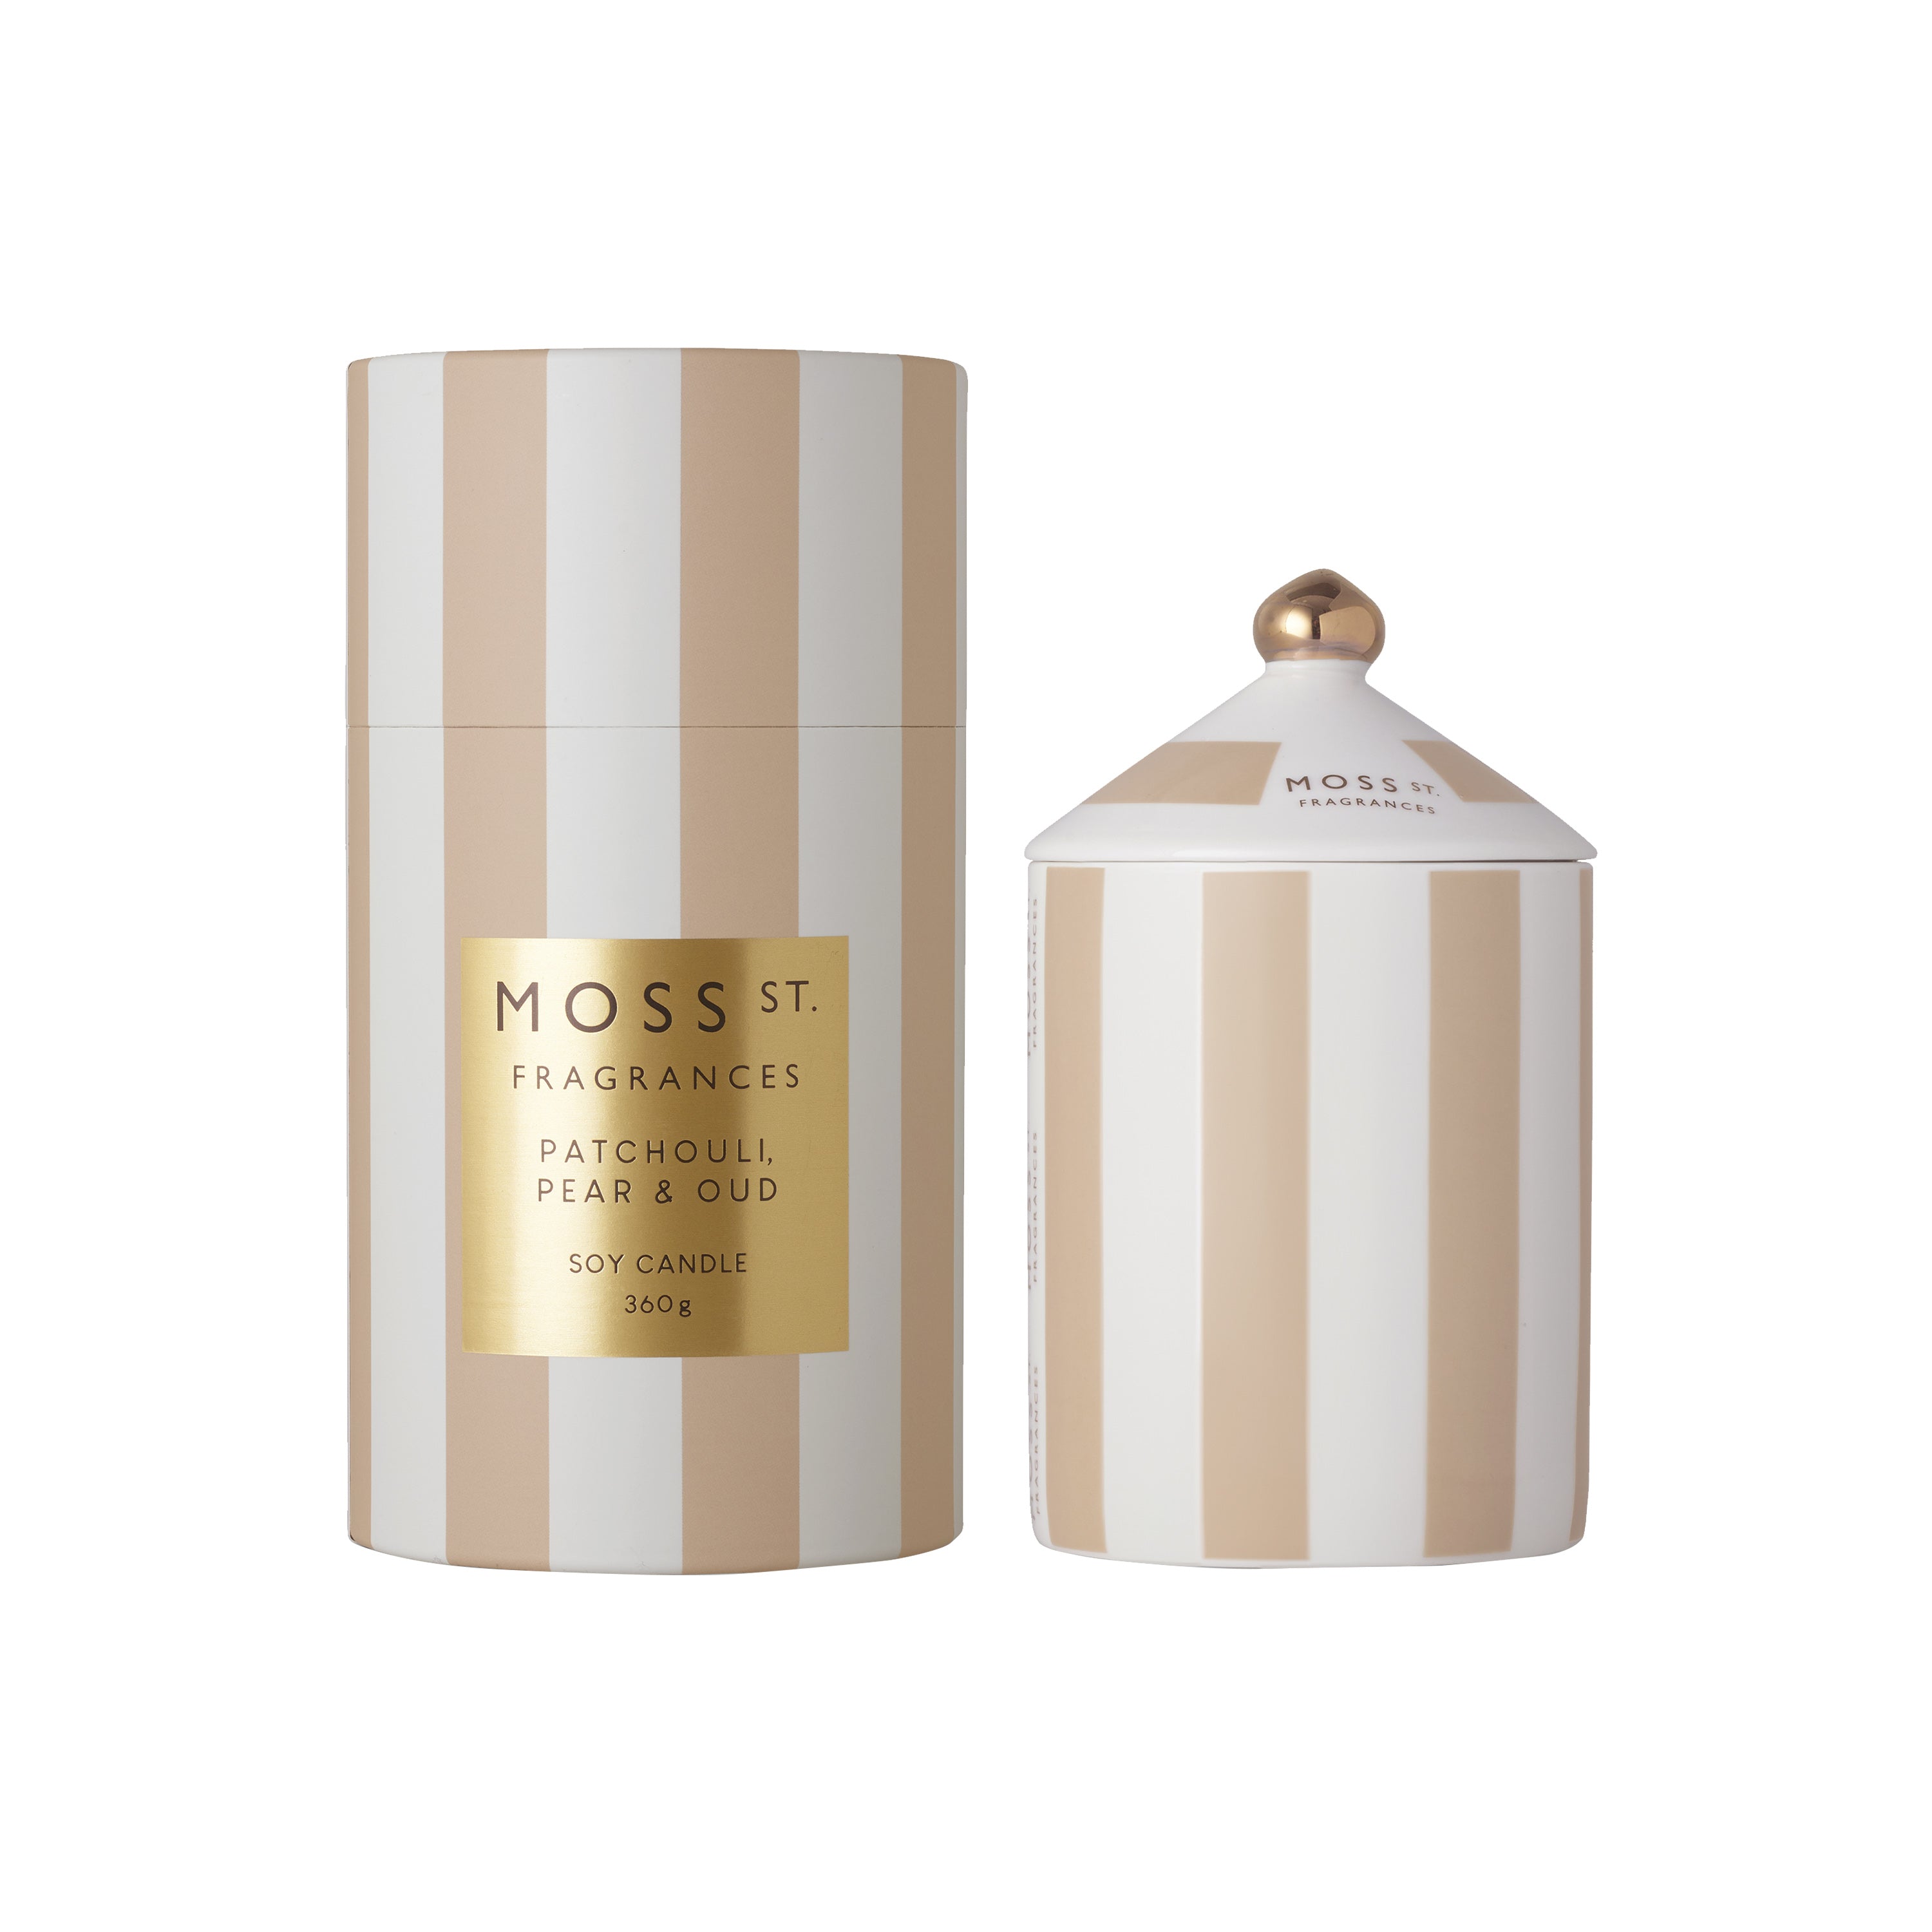 Moss St Patchouli, Pear & Oud Ceramic Large Candle 360g